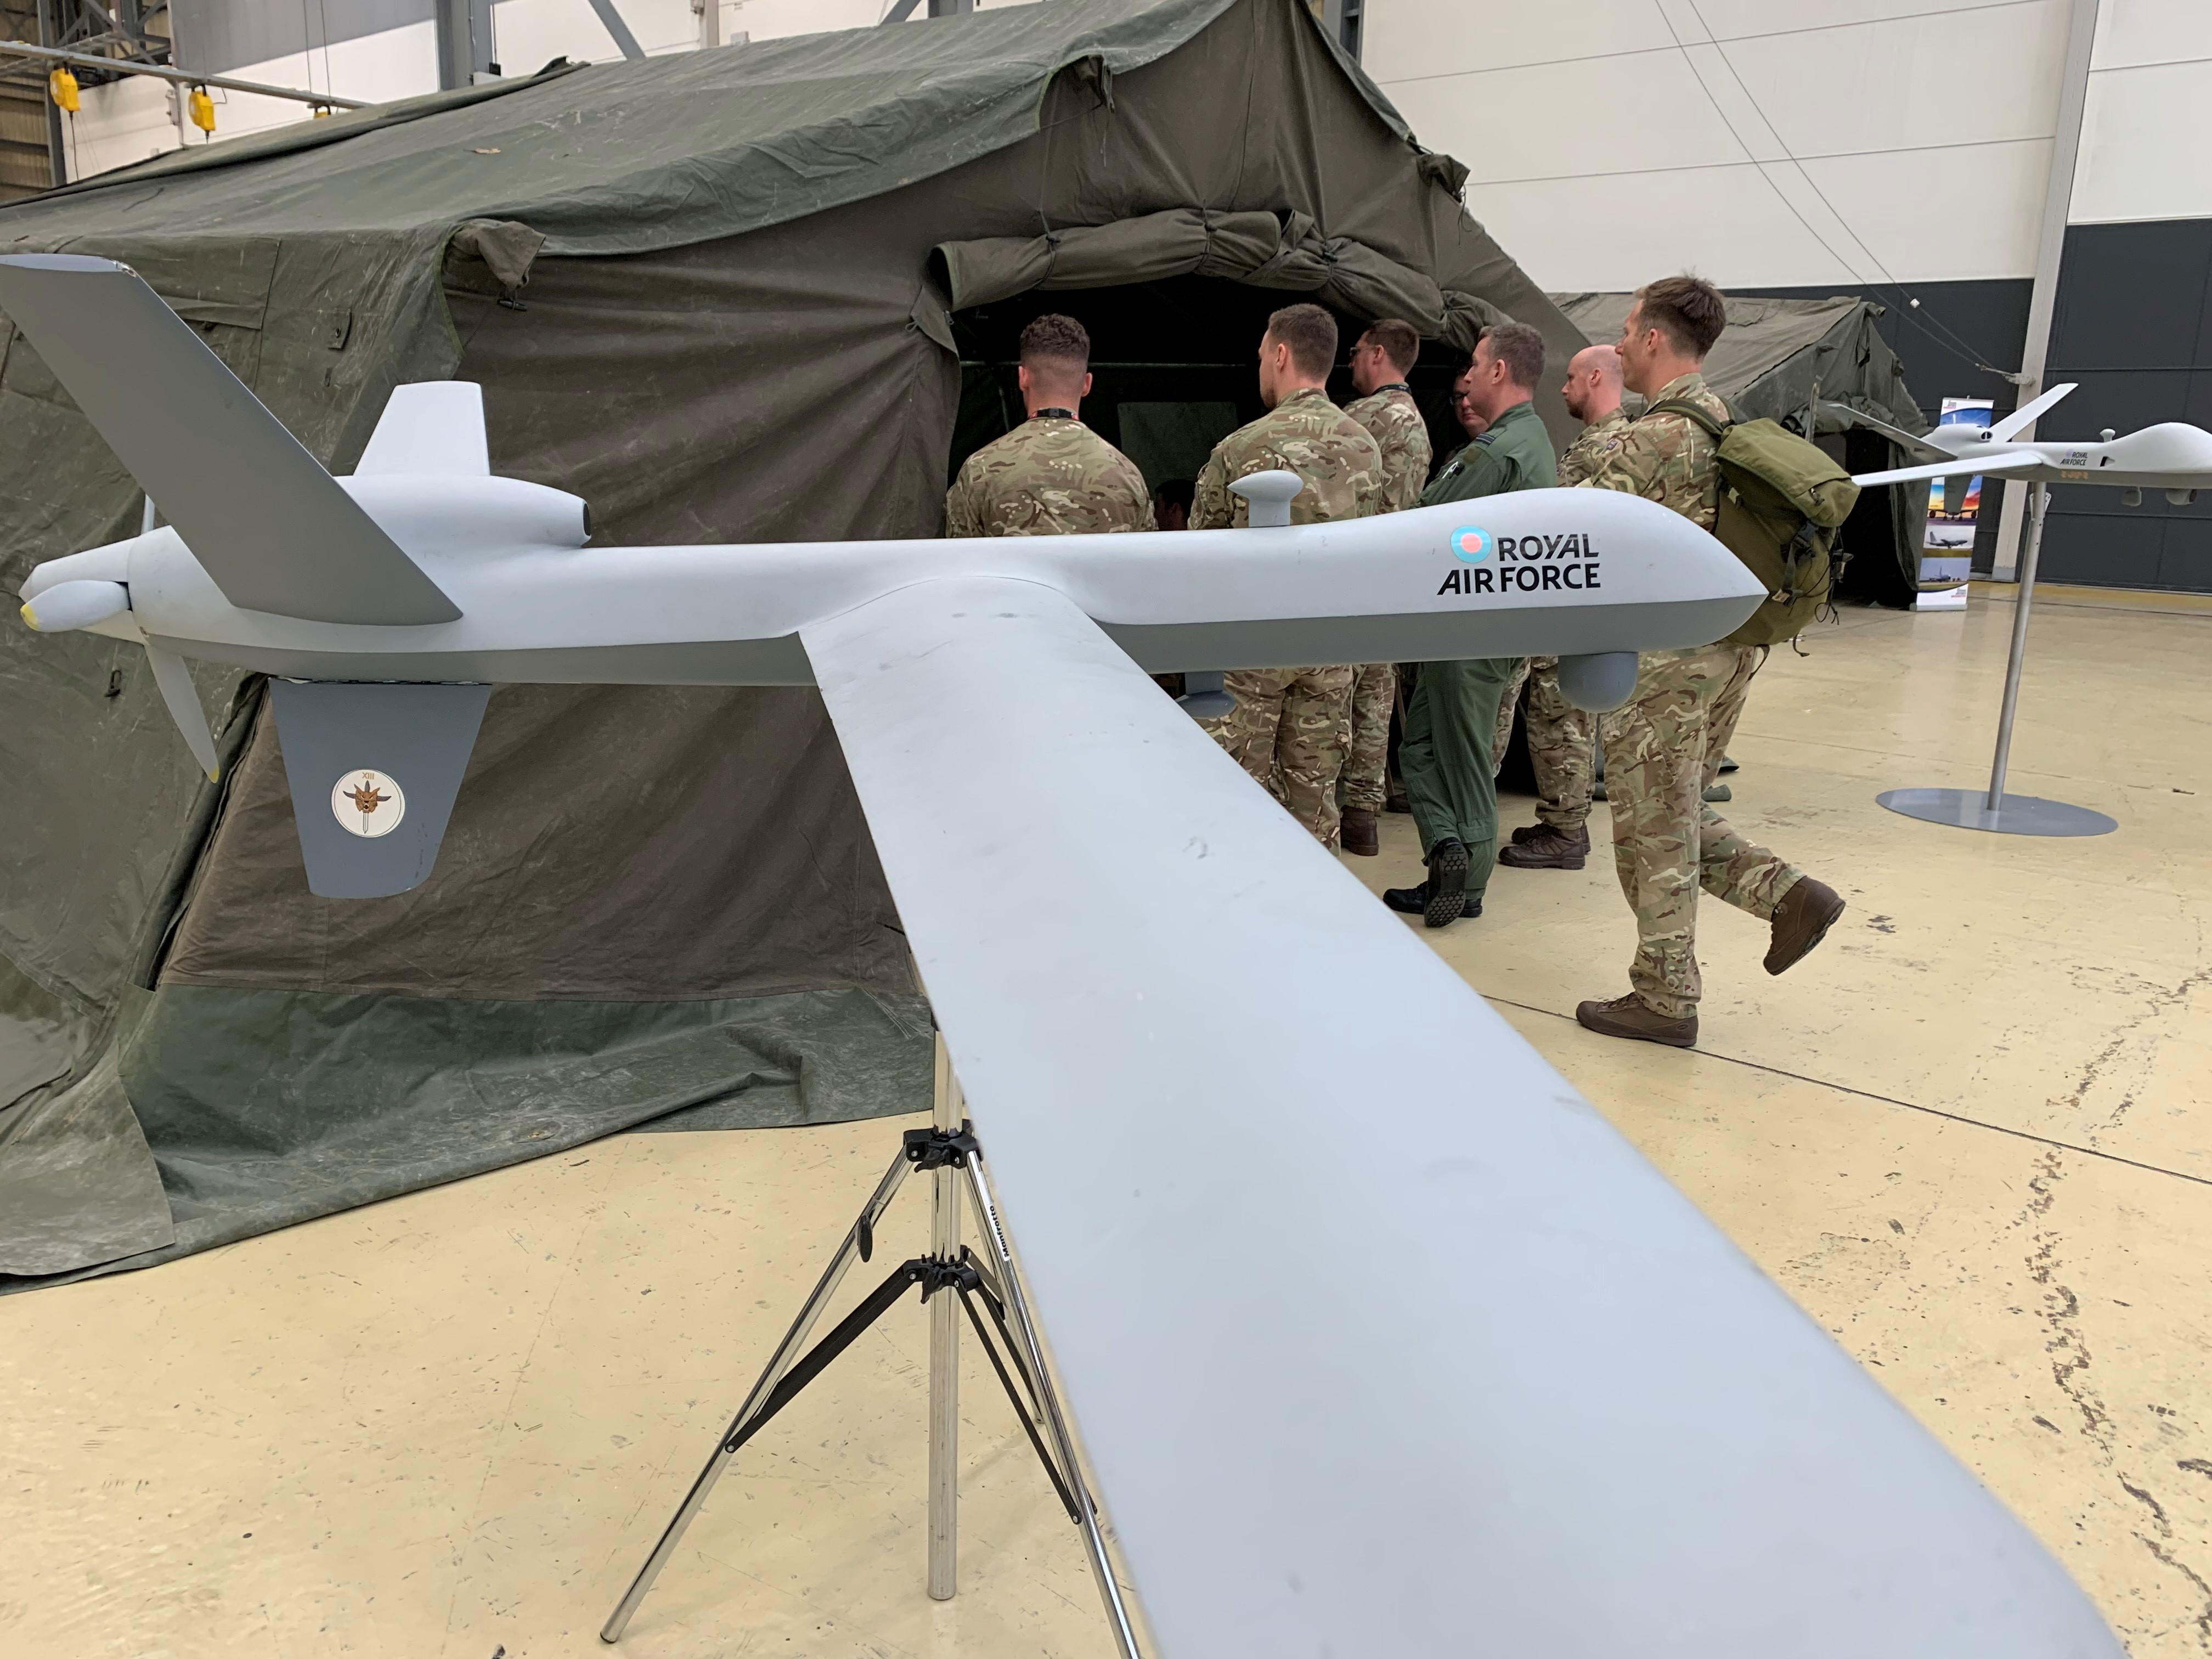 Model aircraft of RAF Reaper with Aviators walking into indoor tent structure.